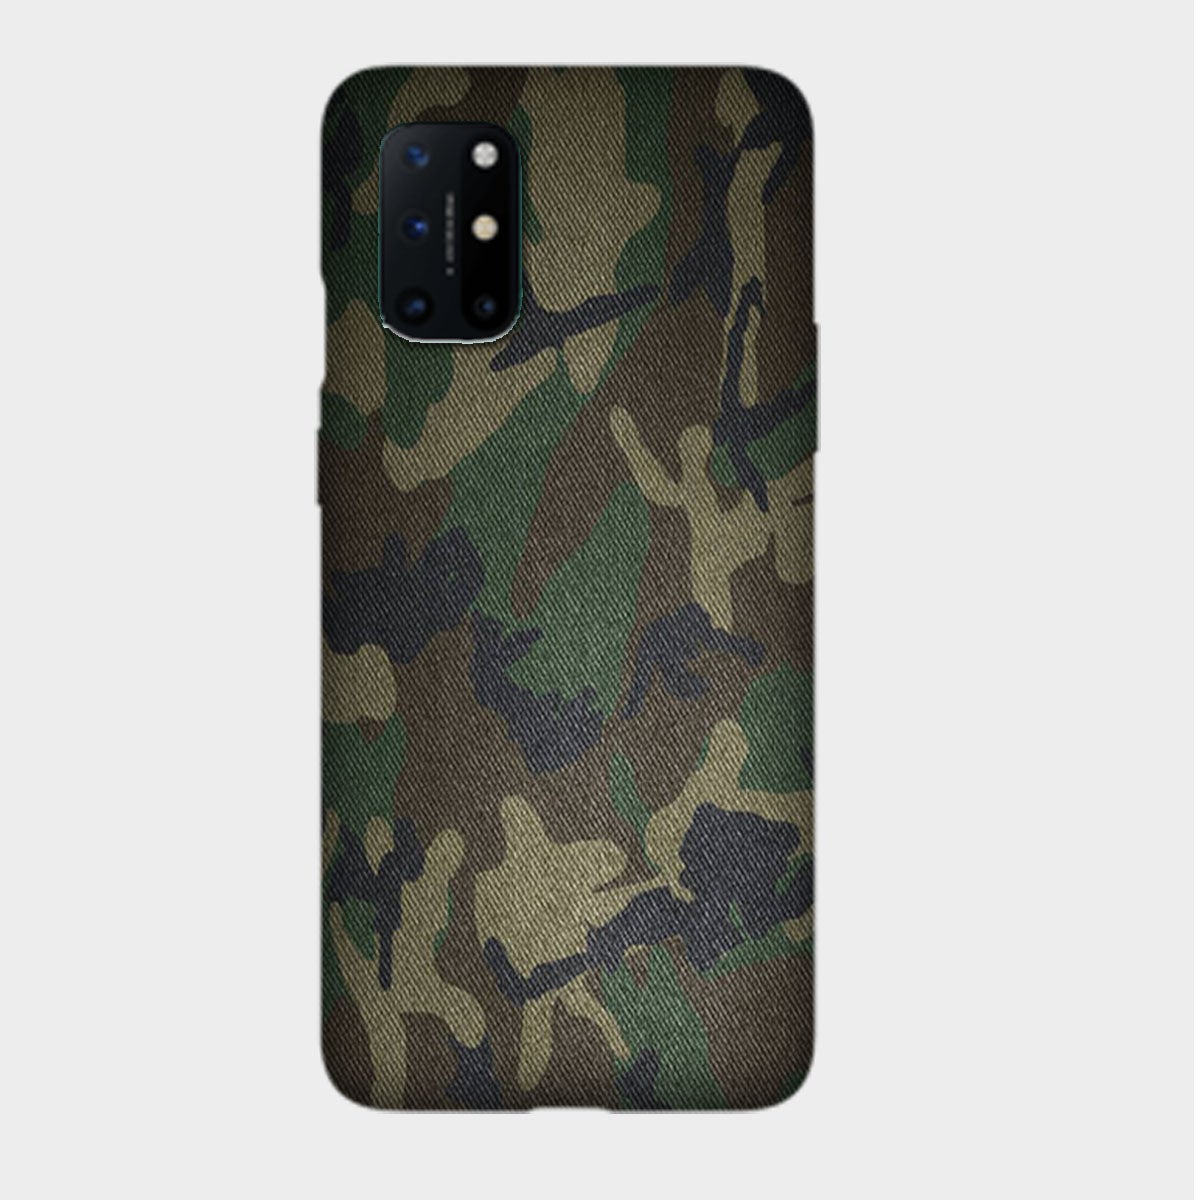 Camoflauge - Mobile Phone Cover - Hard Case - OnePlus